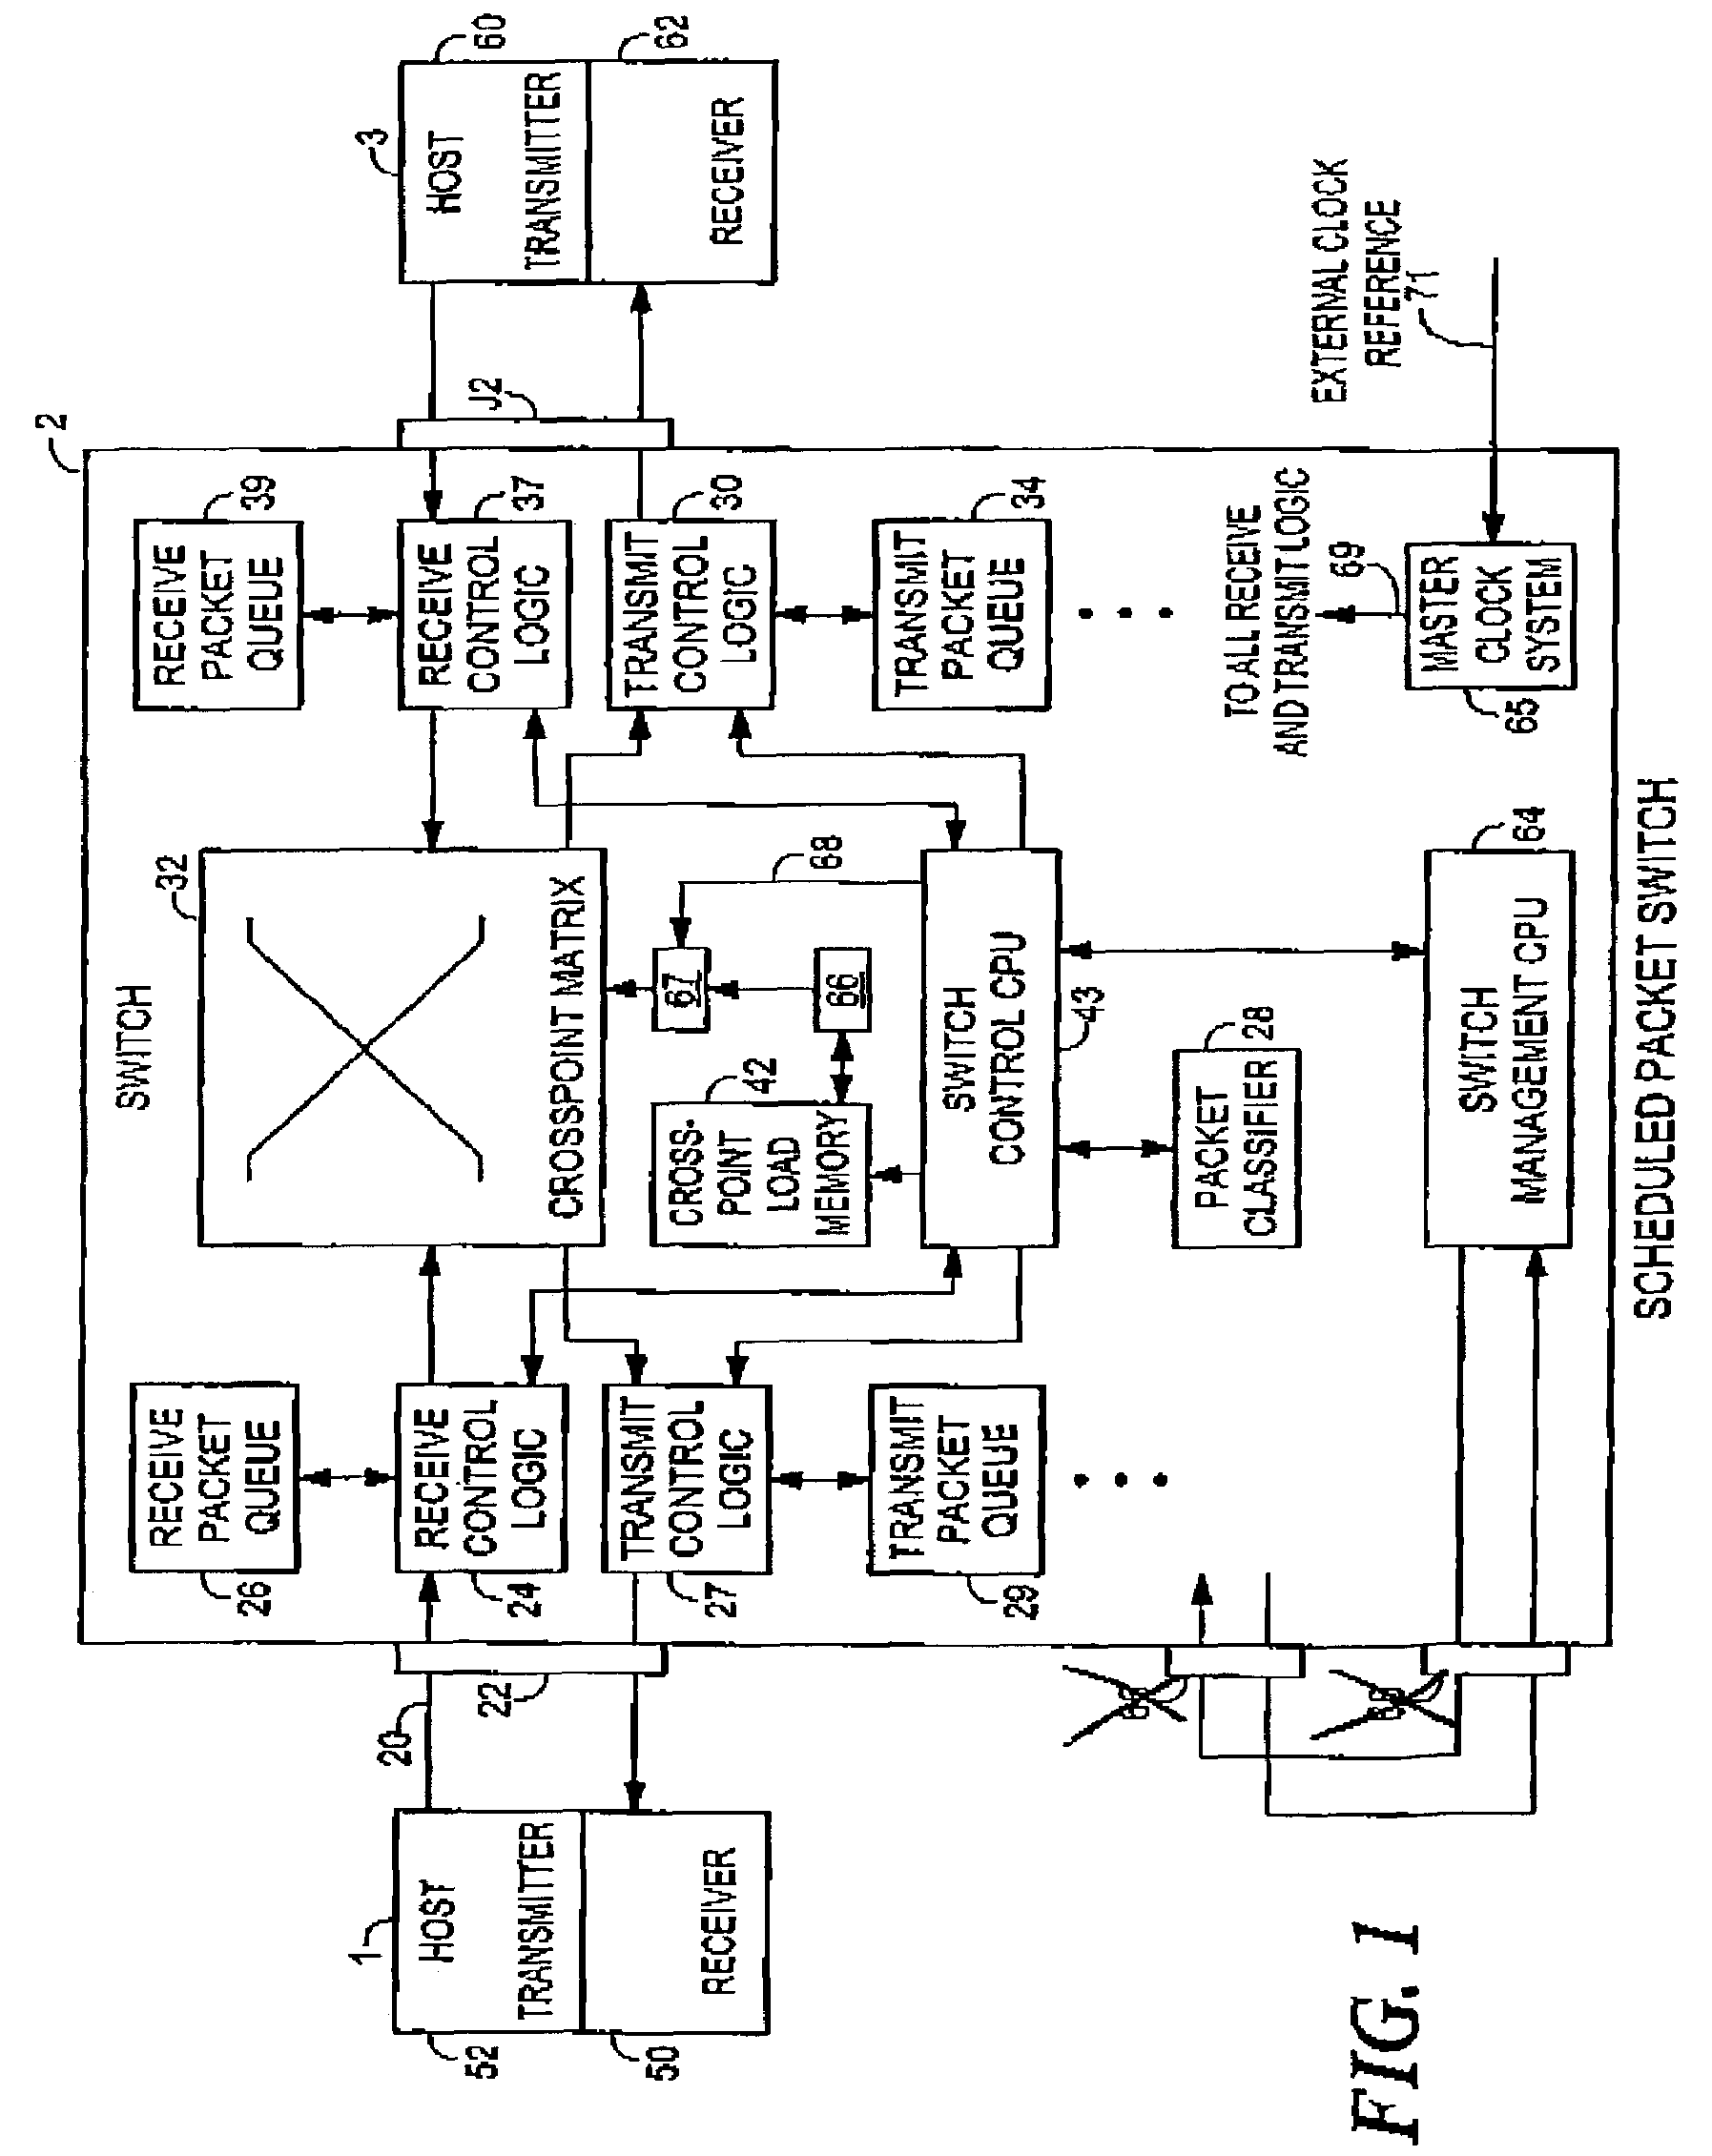 Network switch with packet scheduling